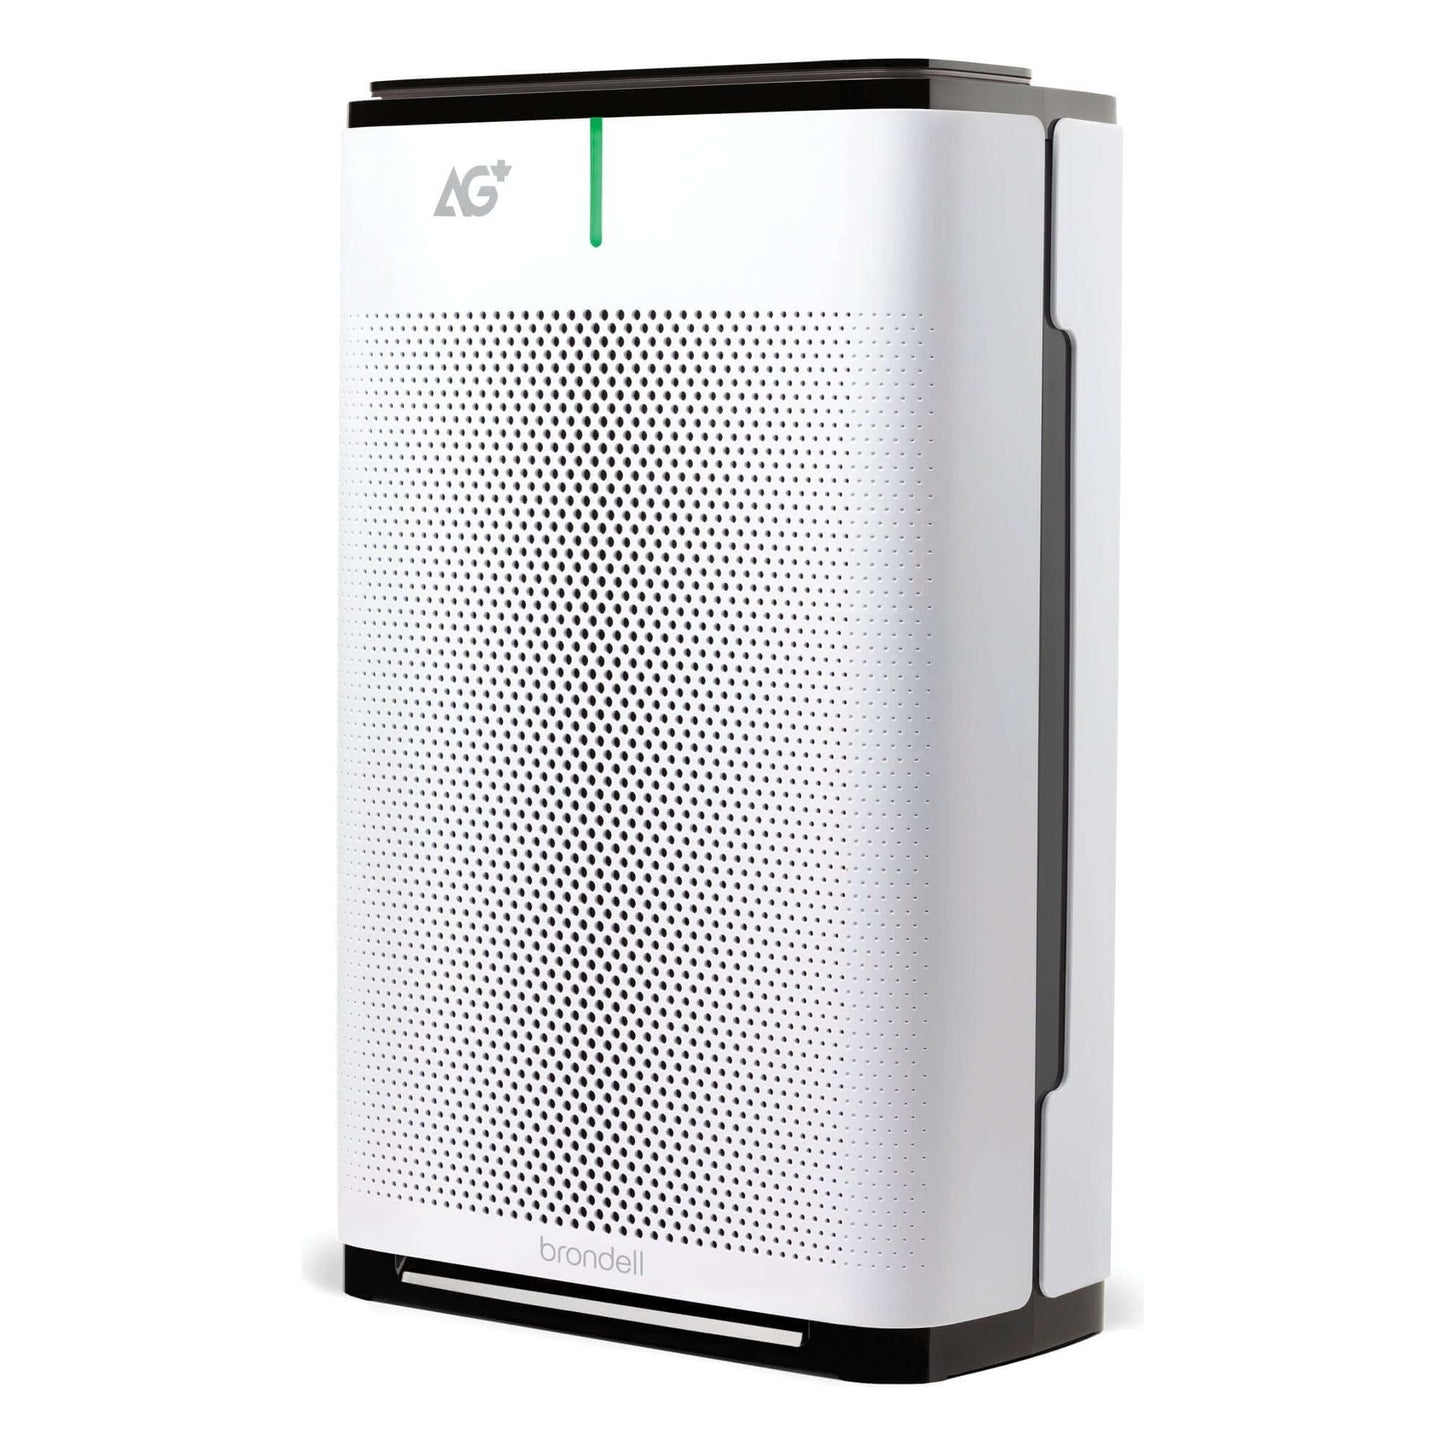 Brondell Pro Sanitizing Air Purifier with AG+ Technology for Purification of SARS-CoV-2, Virus, Bacteria and Allergens - front angled view